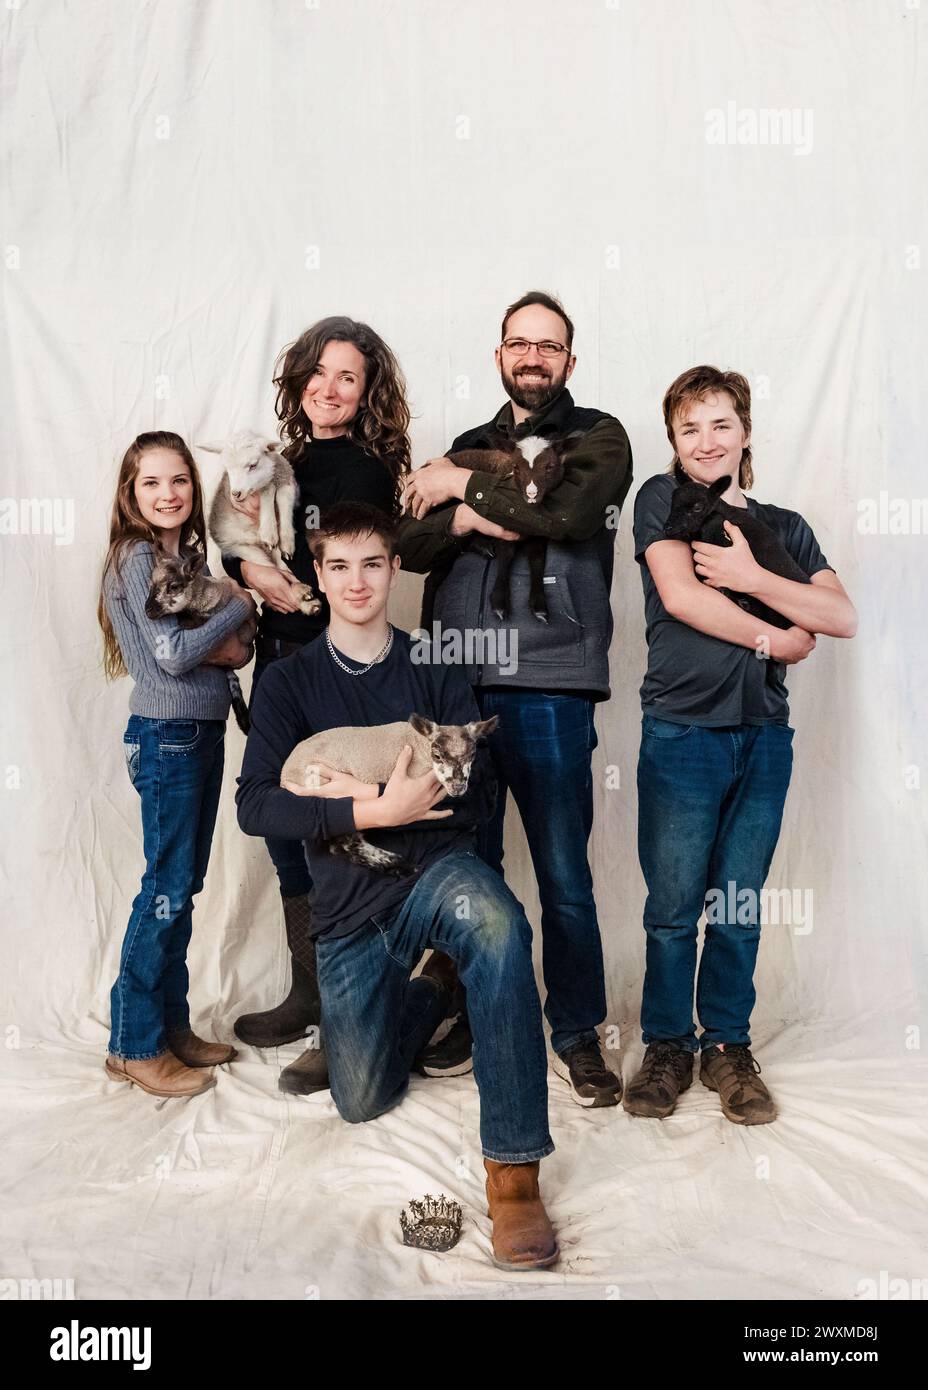 Farm family of five posing with their lambs. Stock Photo